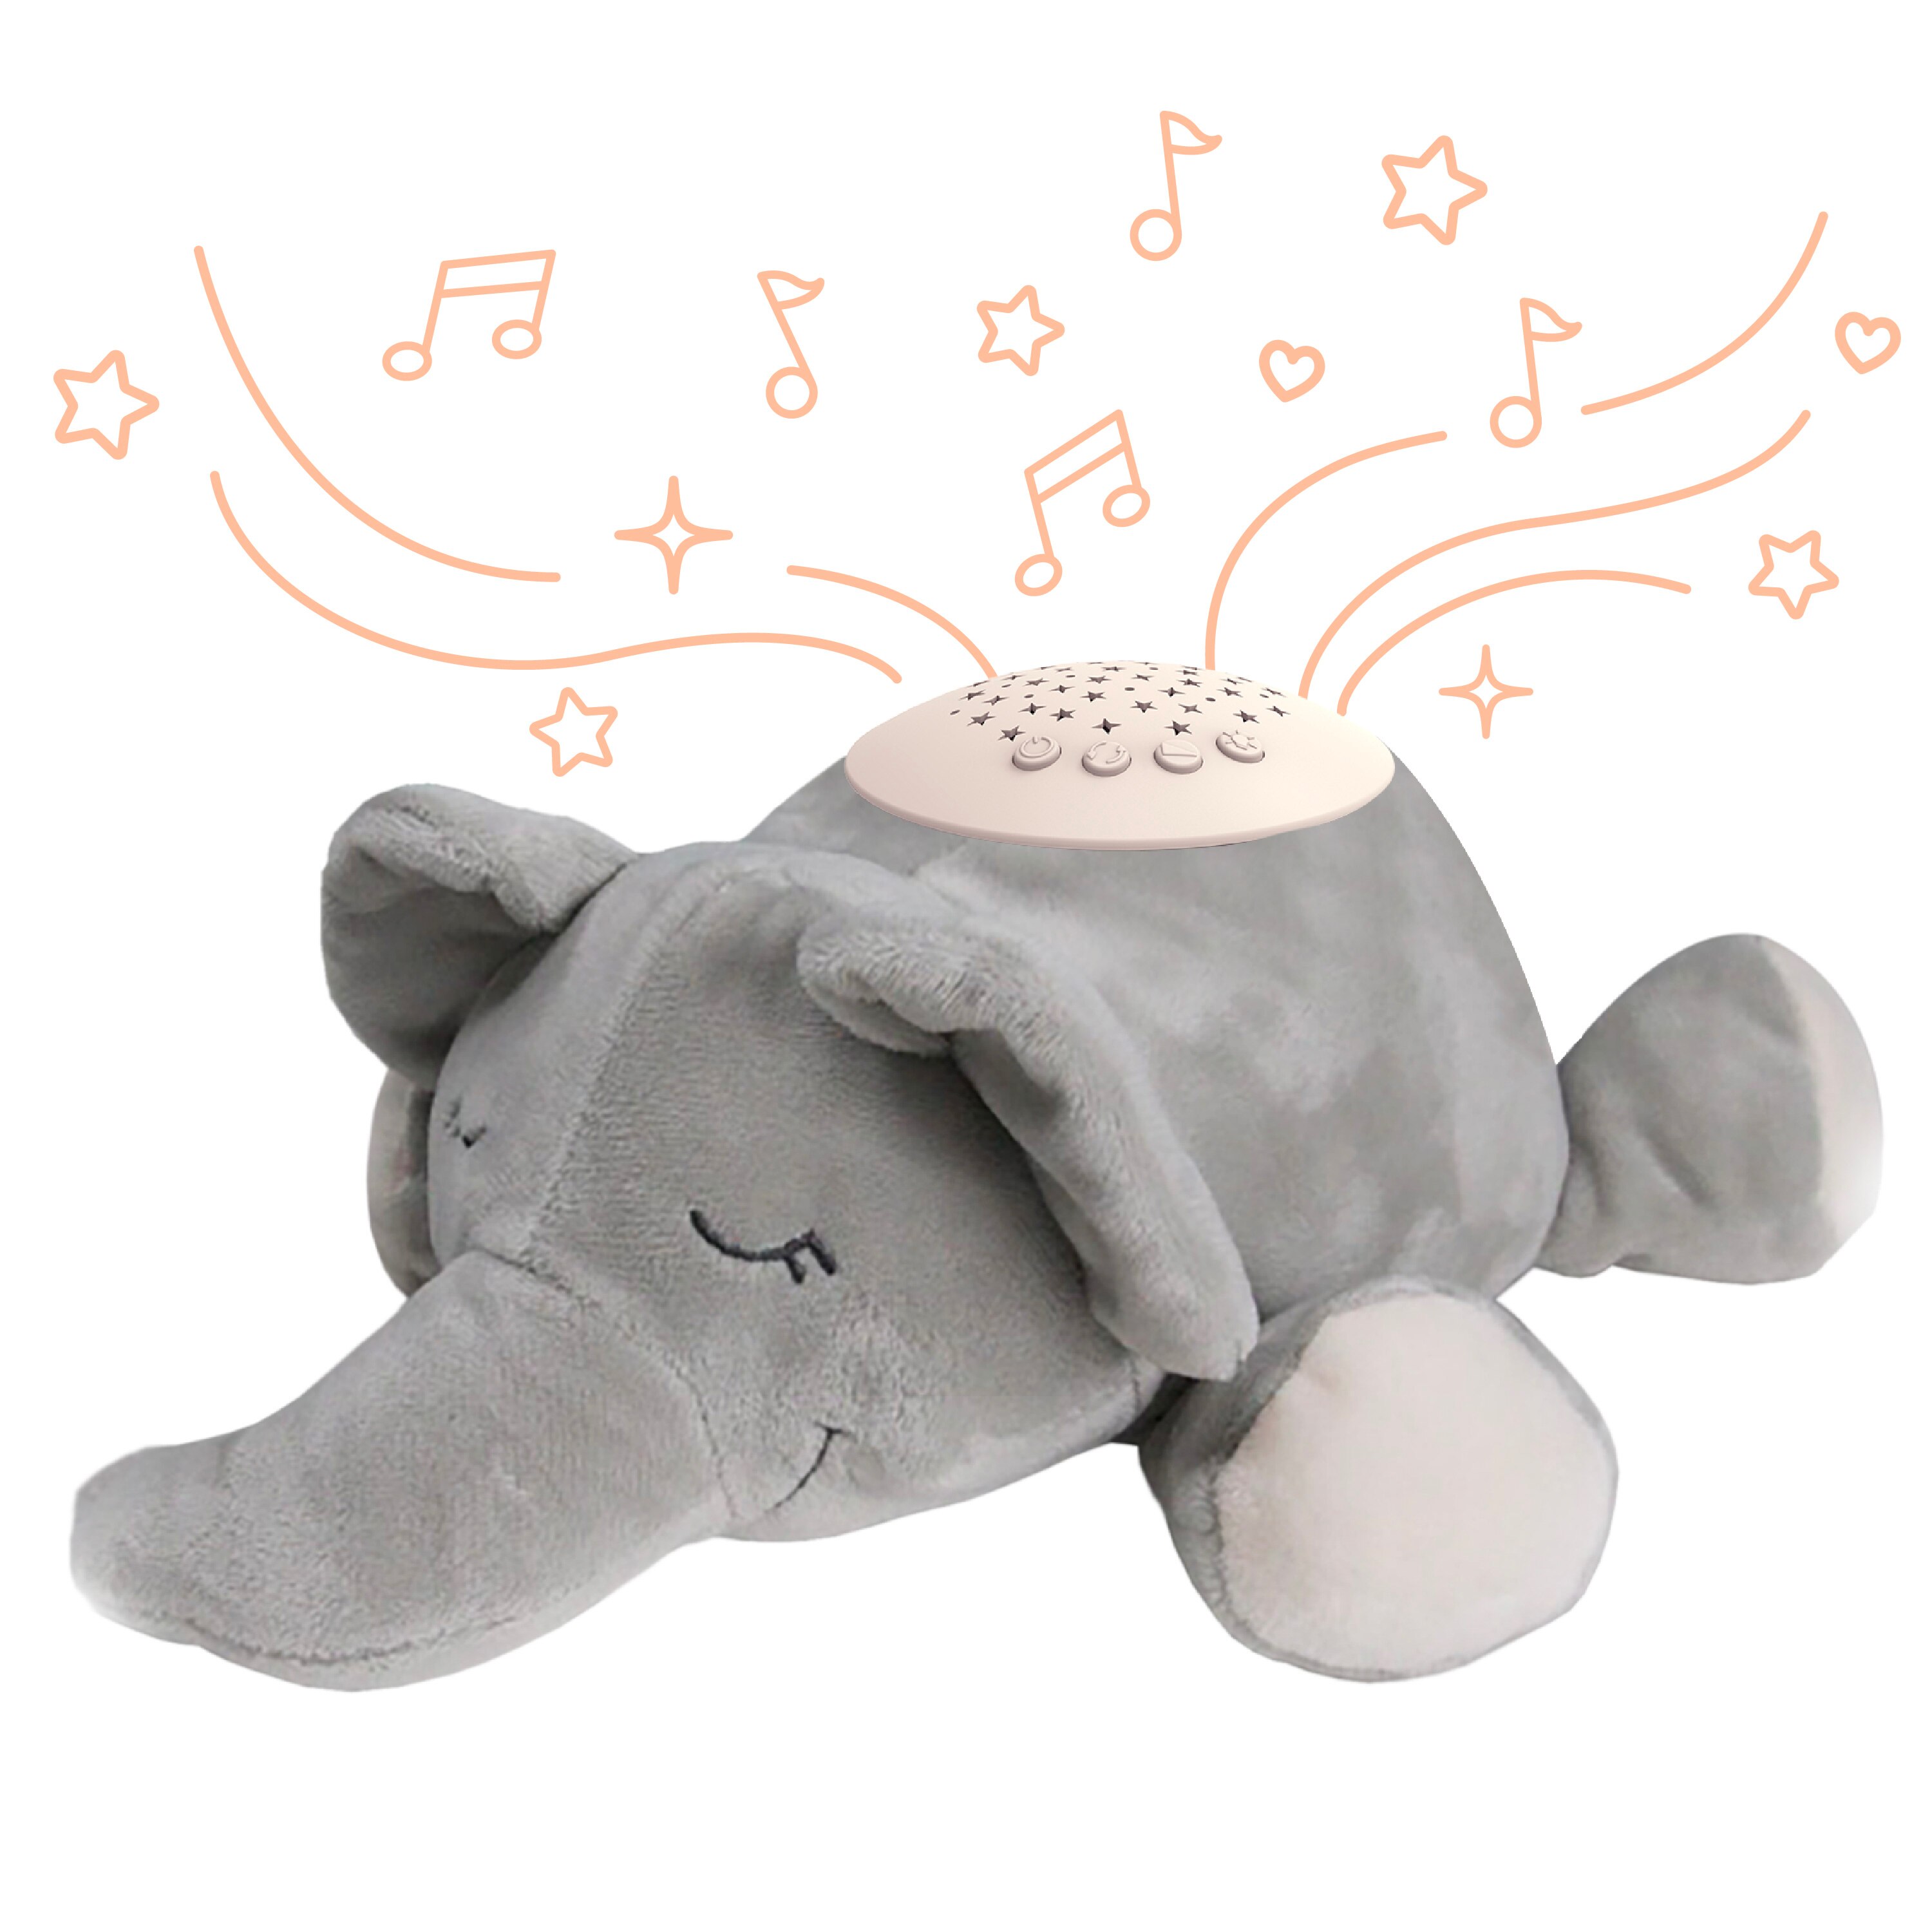  PureBaby Sound Sleepers Portable Sound Machine & Star Projector - Plush Sleep Aid for Baby and Toddlers with Soothing Night Light Display, 10 Lullabies, White Noise, and Heartbeat Sounds (Elephant) 